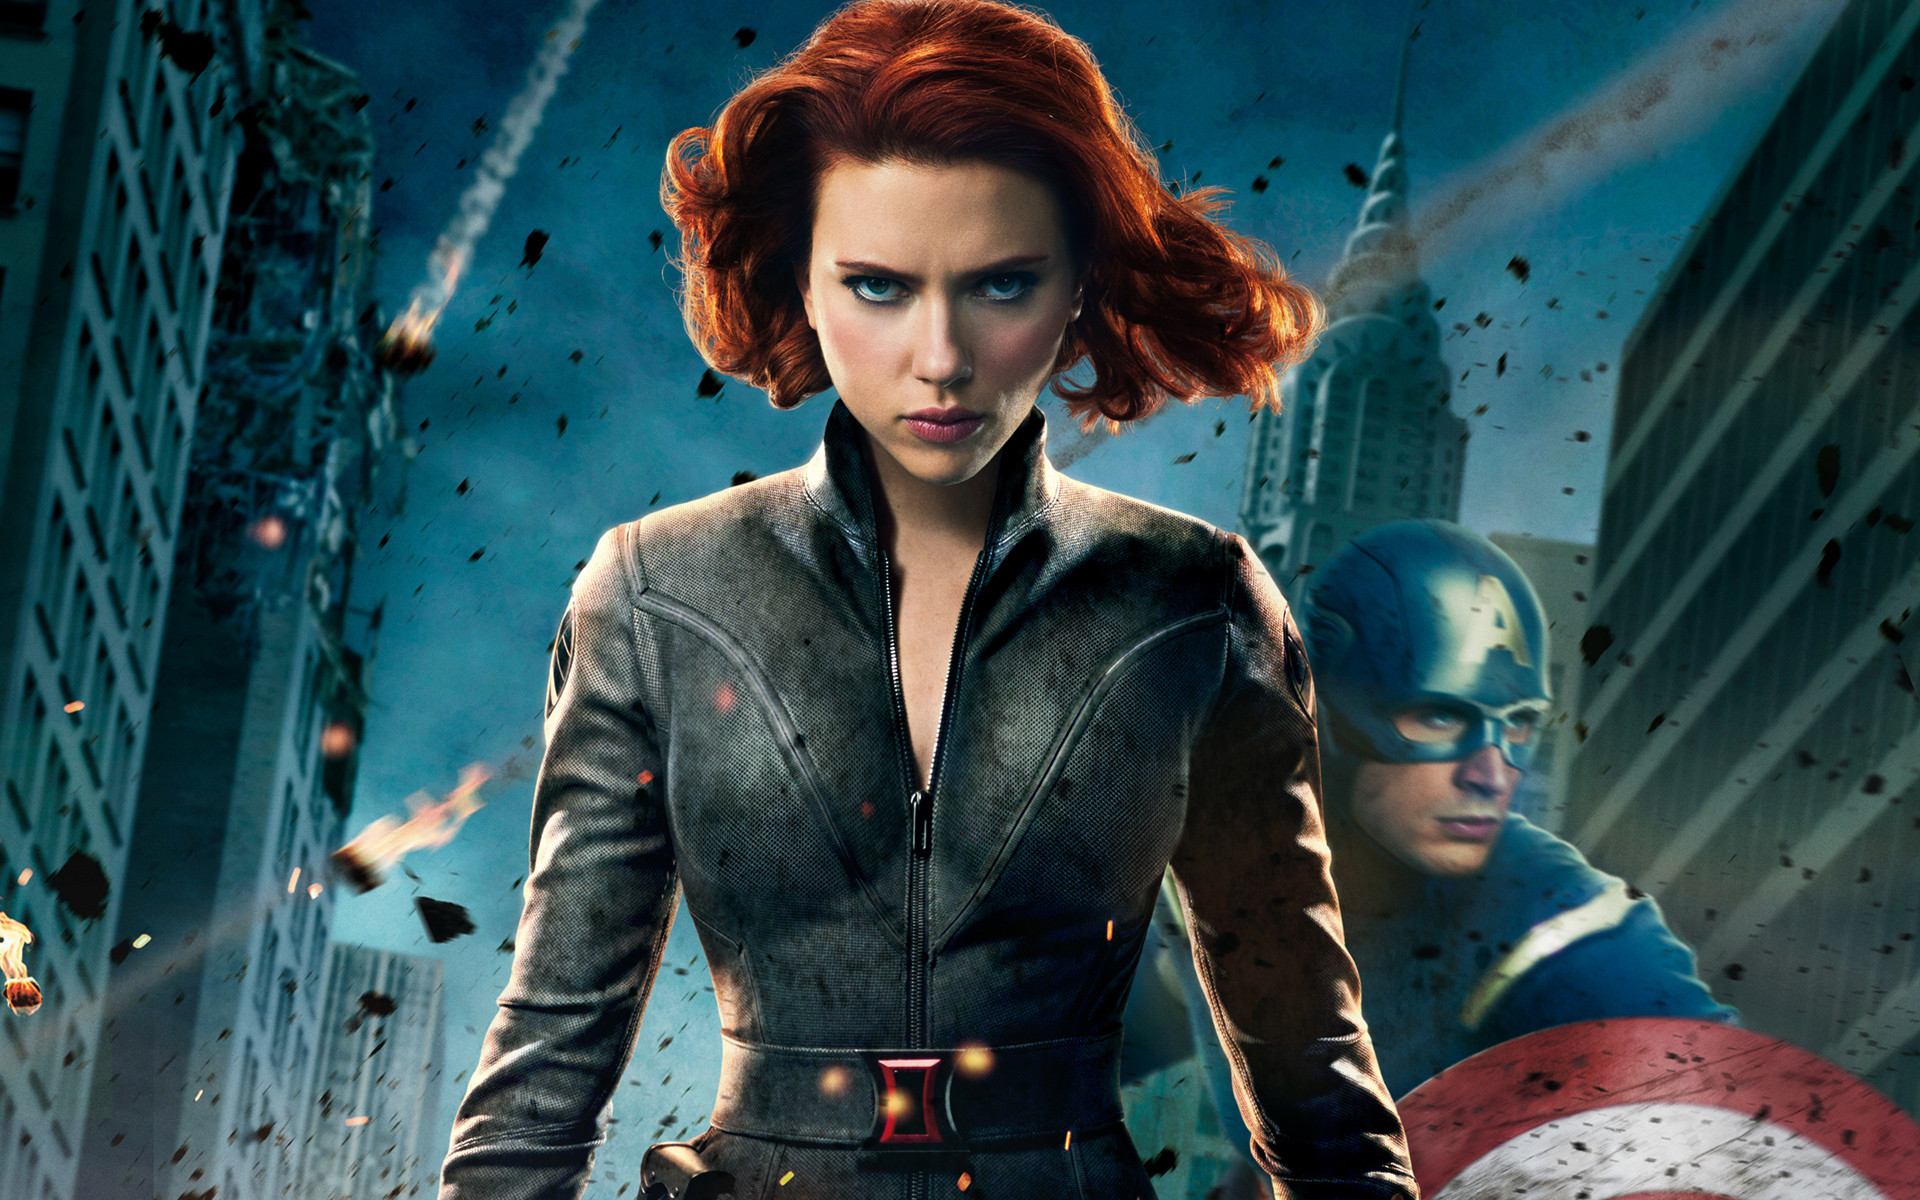 1920x1200 black_widow_in_the_avengers-wide30the_avengers_black_widow_2-wallpaper-1920x1080_Marvel's  Avengers Wallpapers HD | The Avengers Black Widow HD